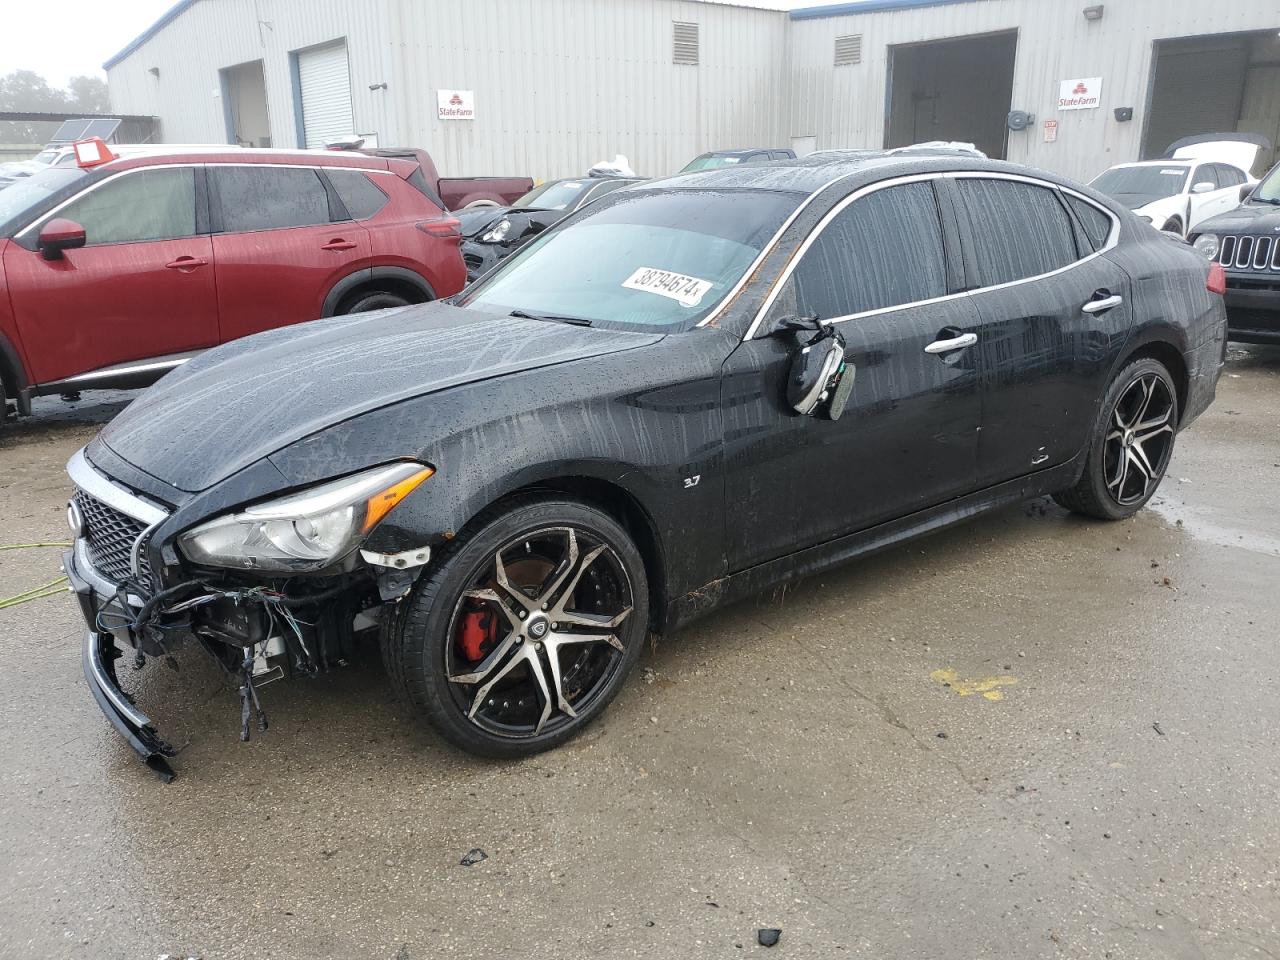 vin: JN1BY1AP4HM740791 JN1BY1AP4HM740791 2017 infiniti q70 3700 for Sale in 70129 2348, La - New Orleans, New Orleans, USA